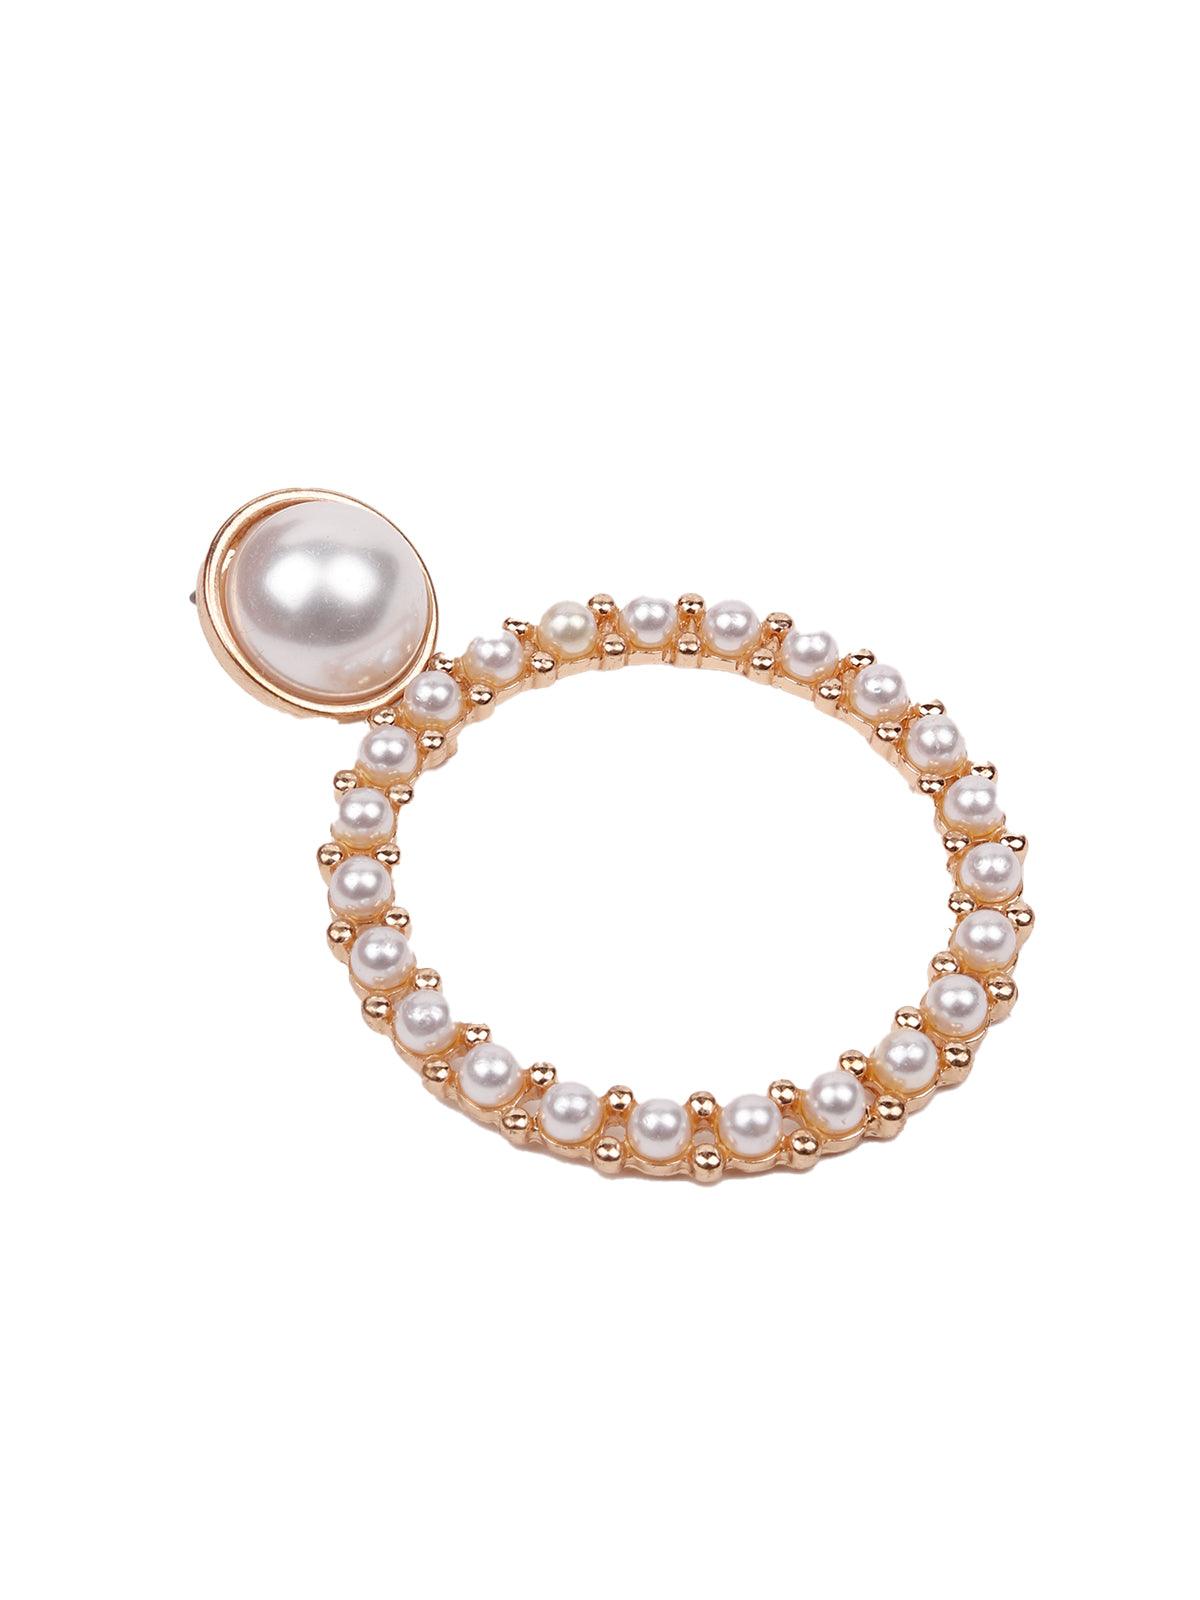 Rounded hoop earrings embellished with artificial pearls - Odette